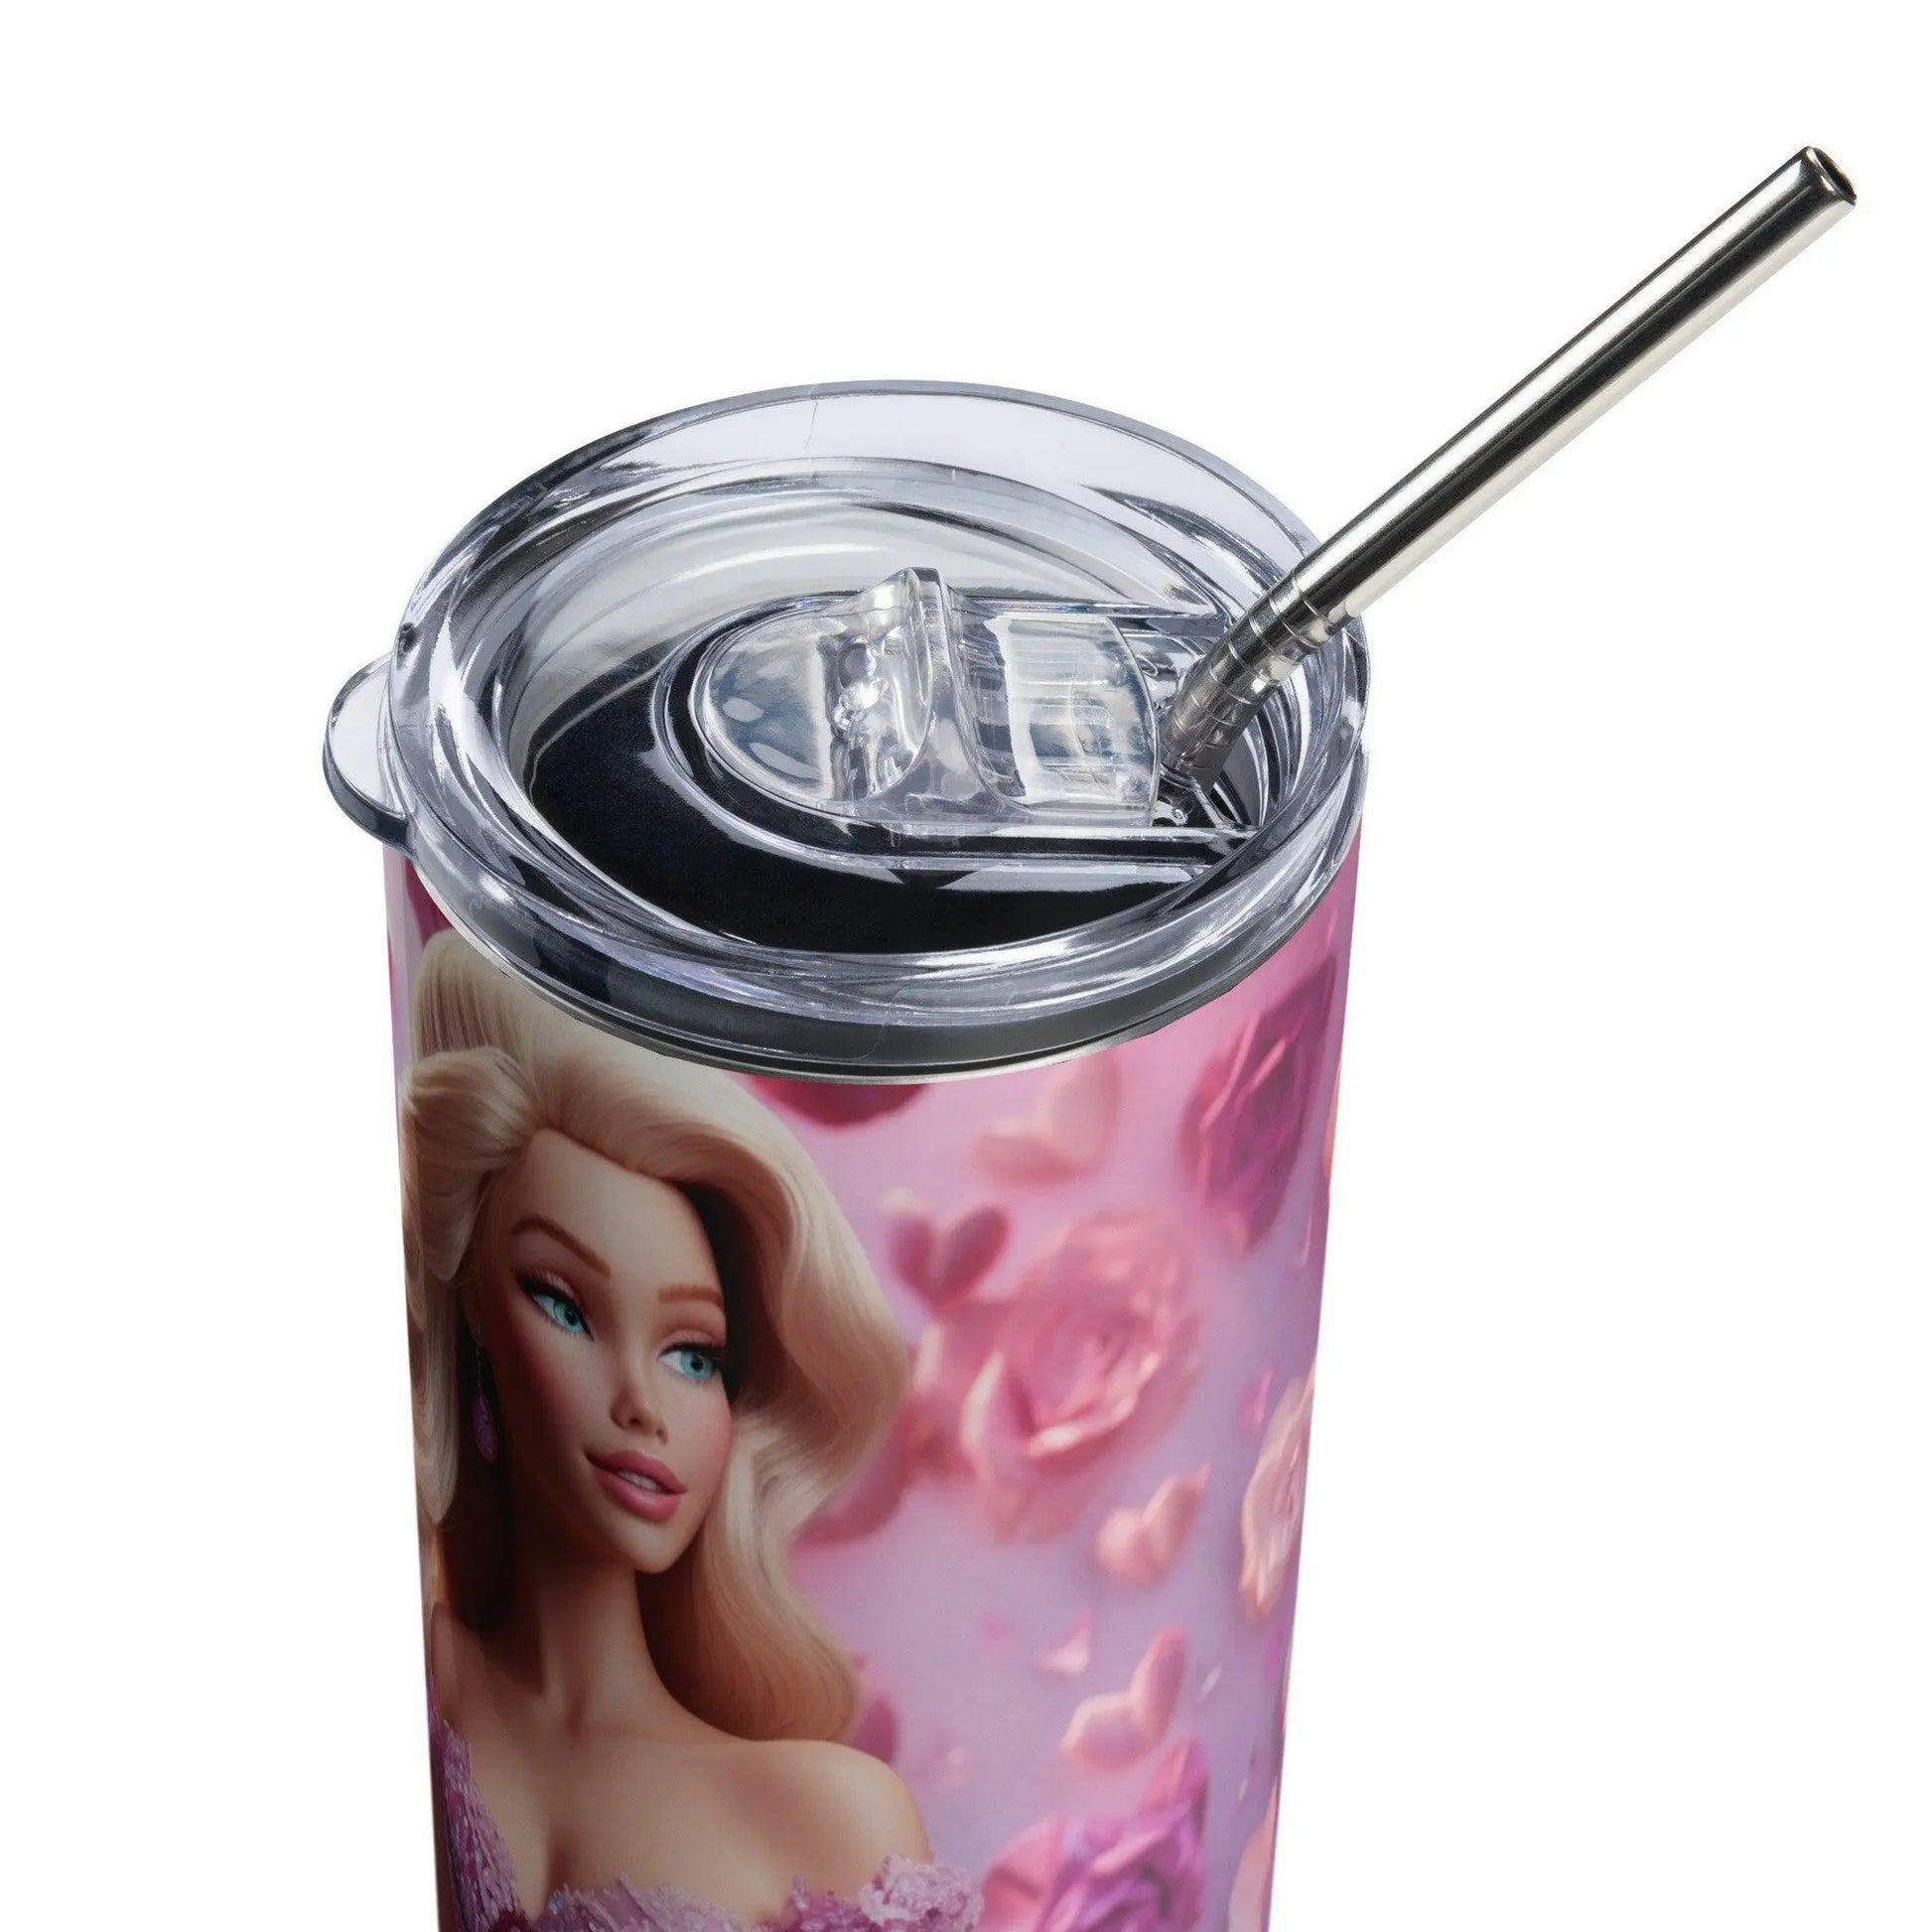 Elegant Barbie in Pink Gown Tumbler - Stainless Steel, 20oz, Metal Straw - Hot or Cold Drinks On The Go!